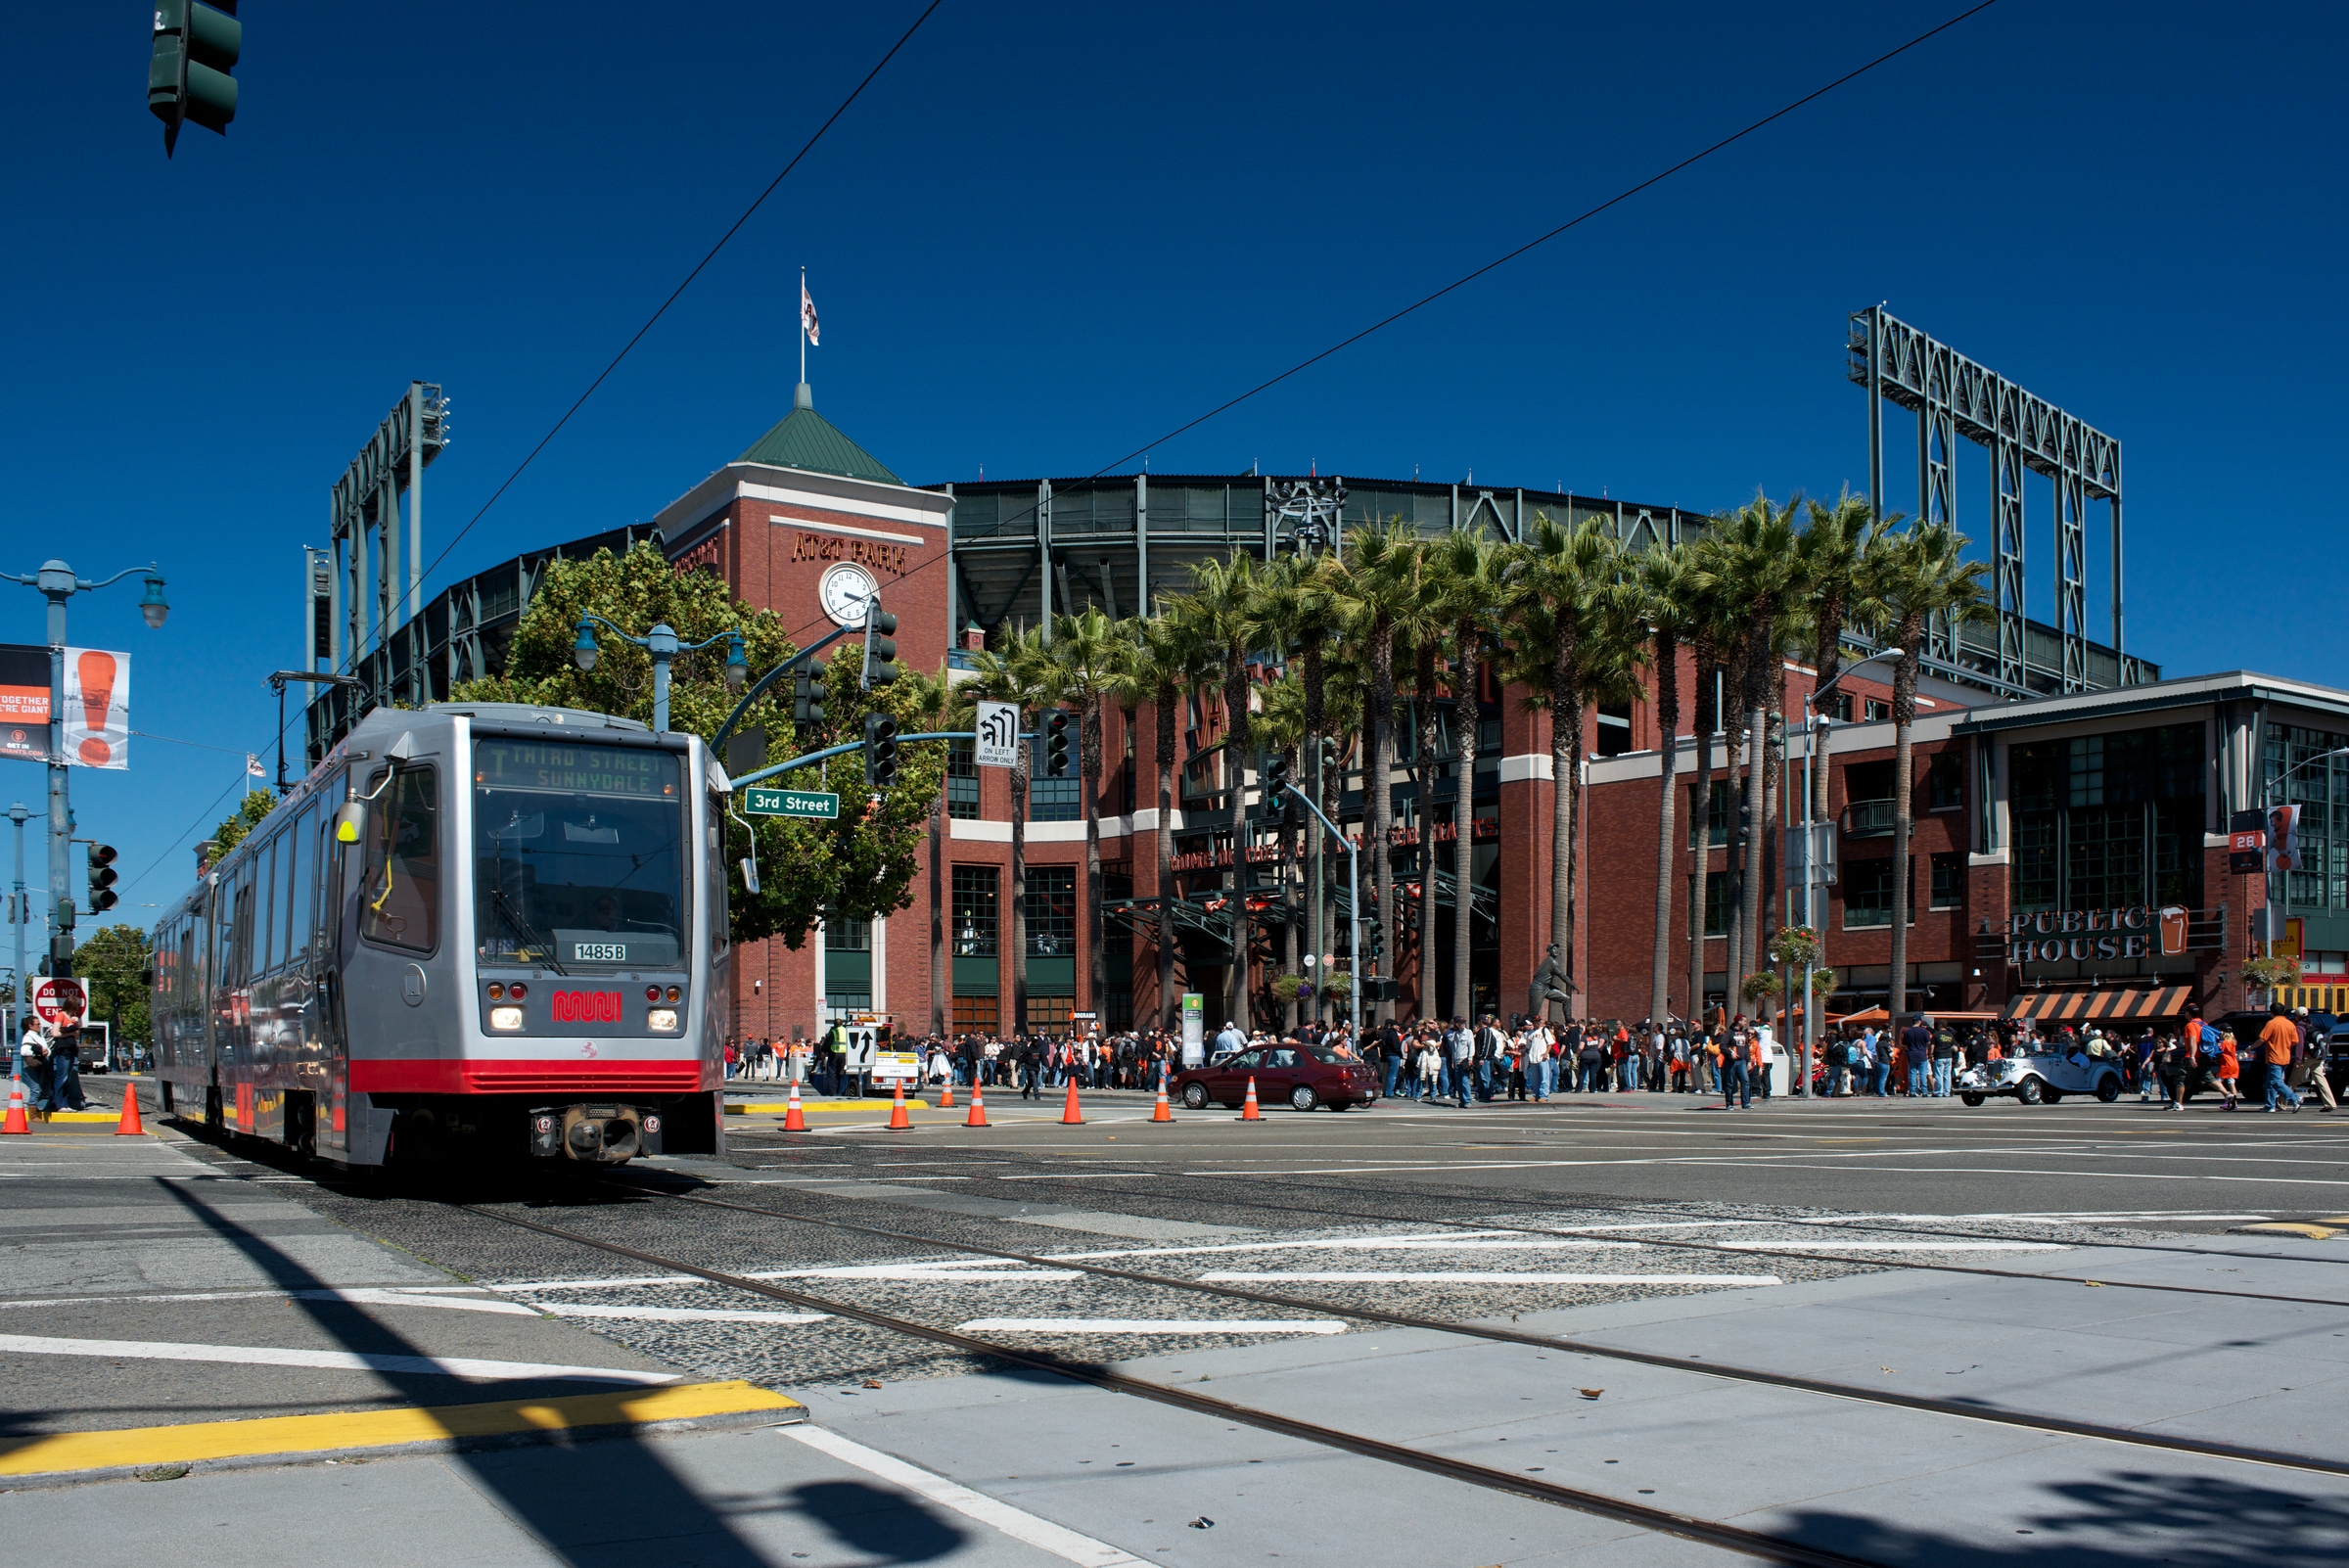 N Judah light rail vehicle traveling westbound on King Street in front of AT&T Park